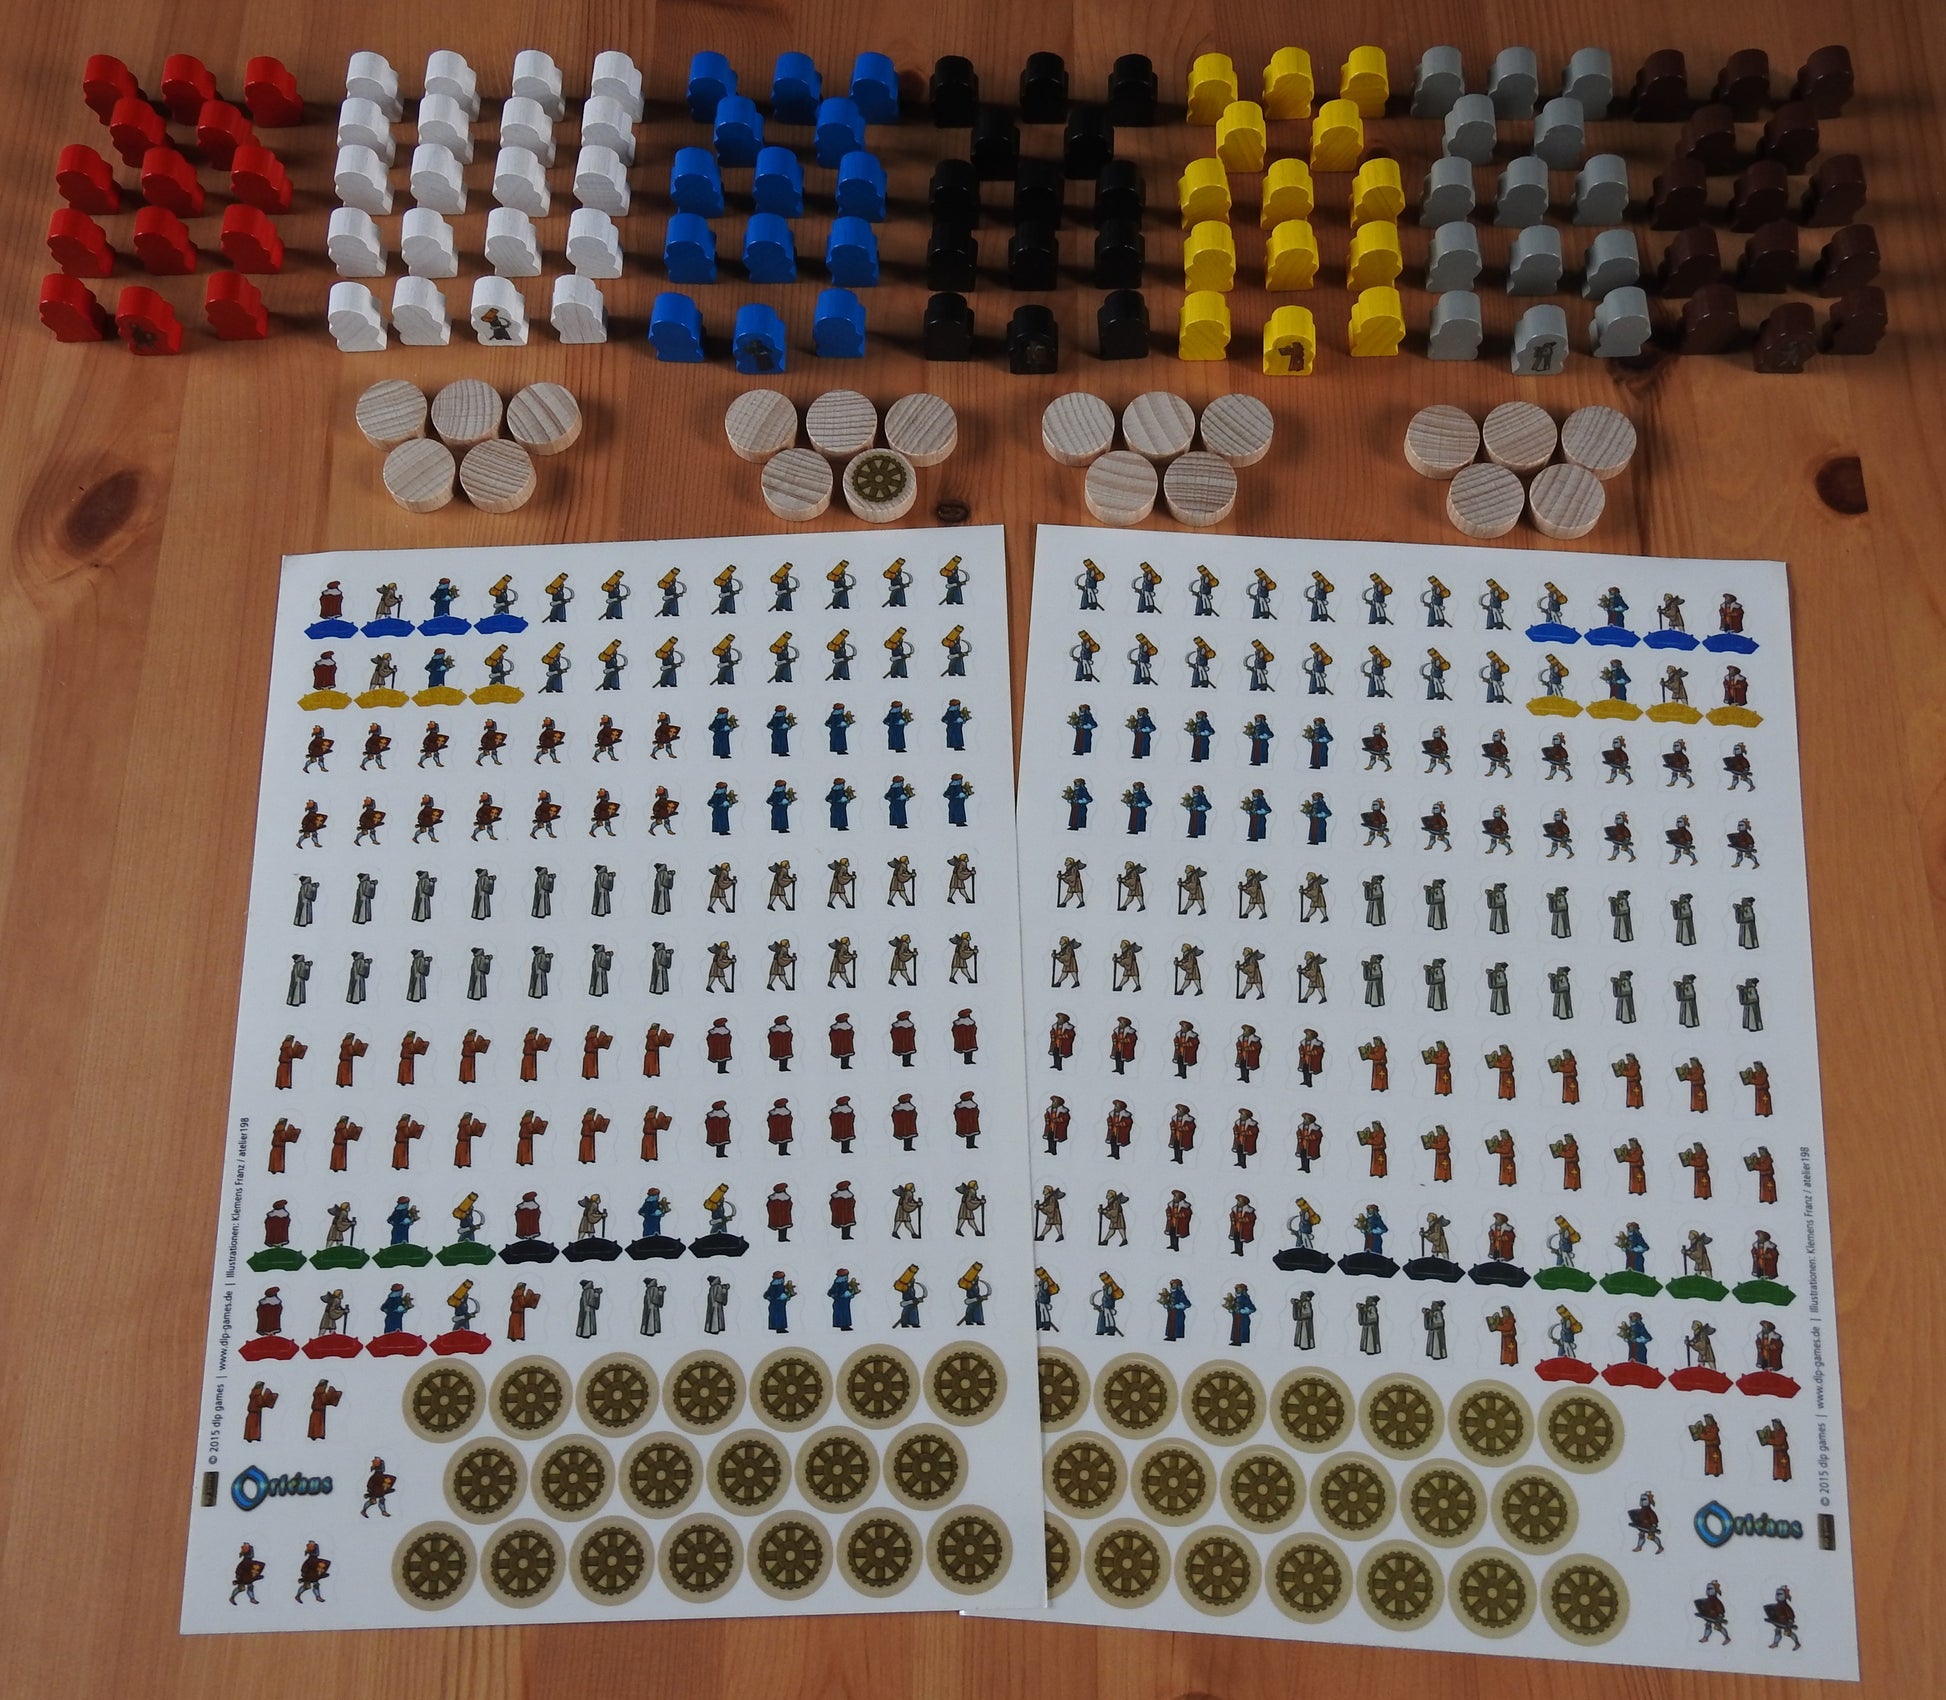 Top view of the Orleans Upgrade Kit, feauturing dozens of wooden figures and hundreds of stickers.